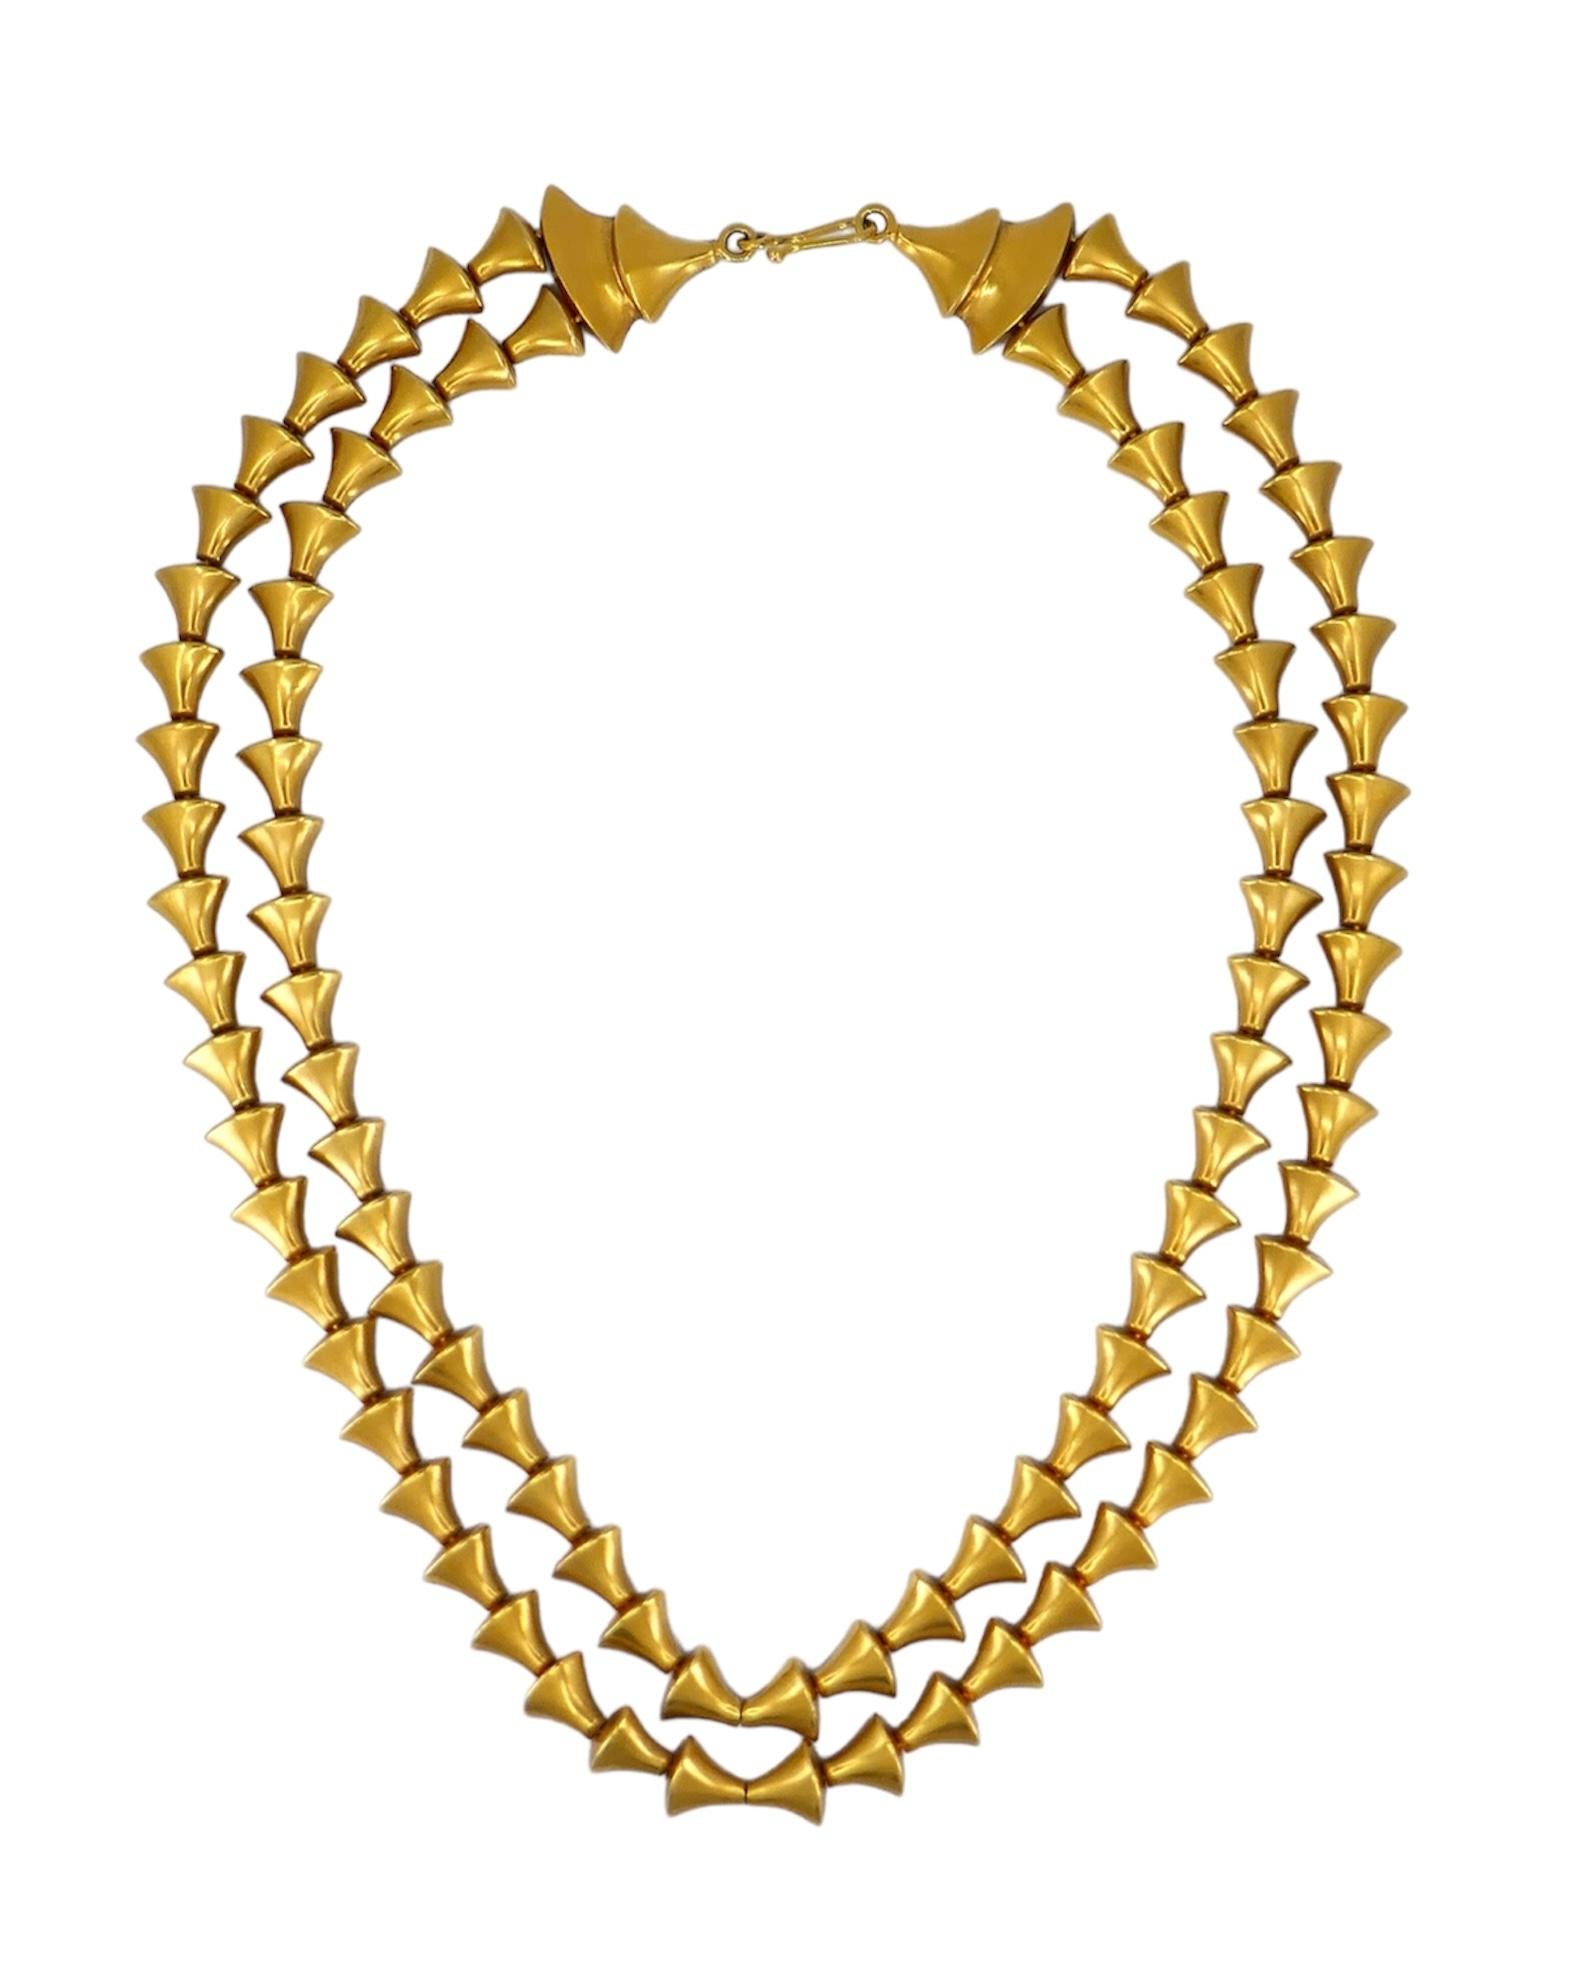 Crafted by Greek design house Zolotas in the 1970s, this 18k gold necklace epitomizes timeless elegance and craftsmanship. It features a double-stranded design with a fish hook closure. Weighing 72.1 grams, the the inner chain measures 16.5 inches,